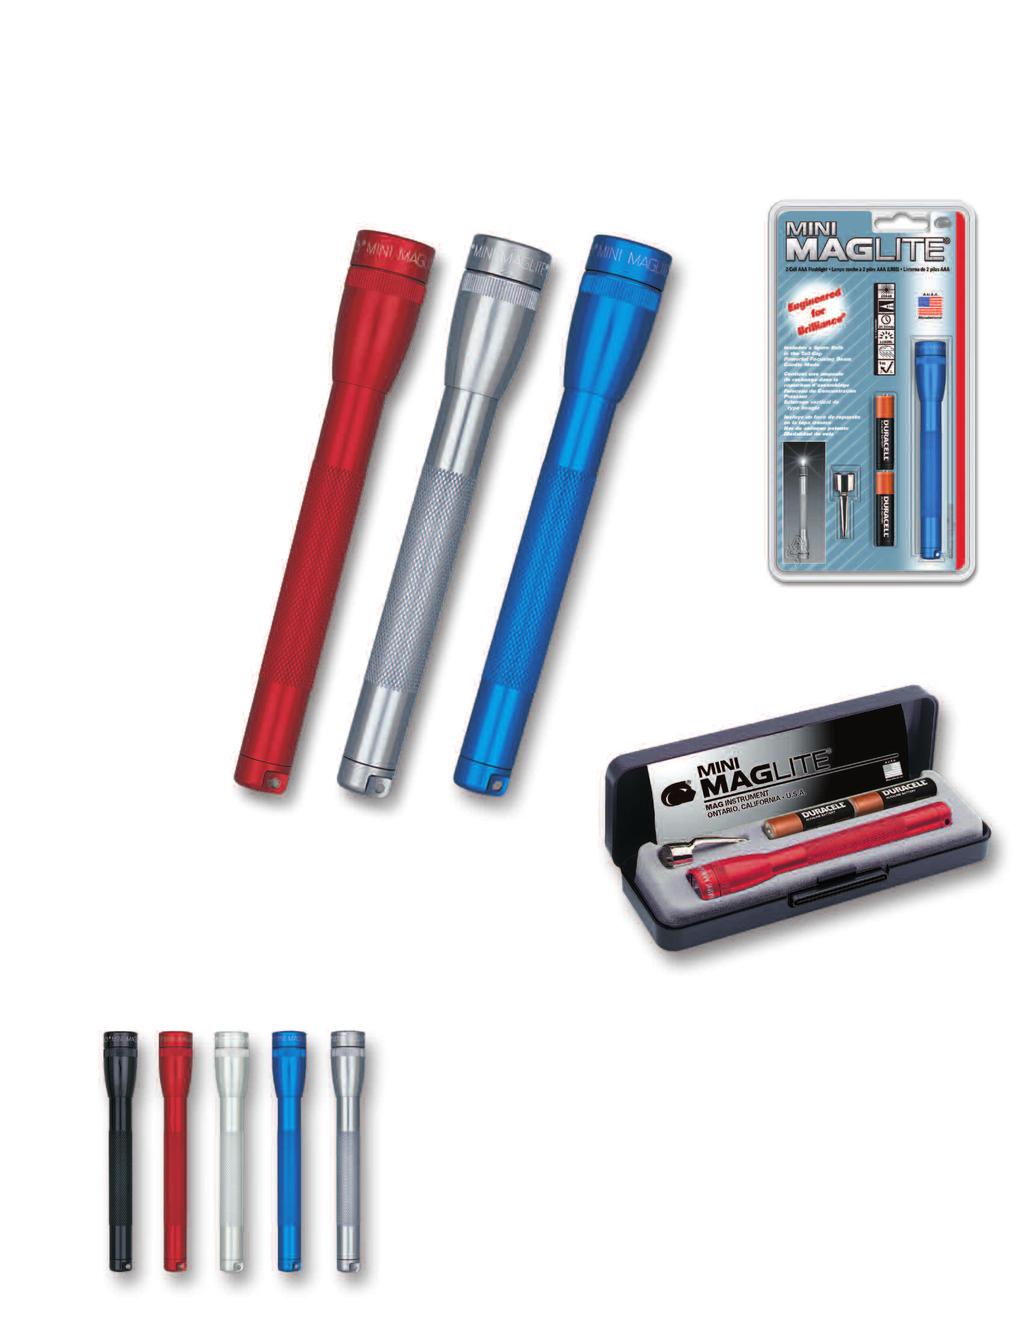 MINI MAG-LITE 2-CELL AAA FLASHLIGHT SOLITAIRE 1-CELL AAA FLASHLIGHT The Mini Maglite 2-Cell AAA flashlight has all the same features and functions as the Mini Maglite AA flashlight in a smaller,